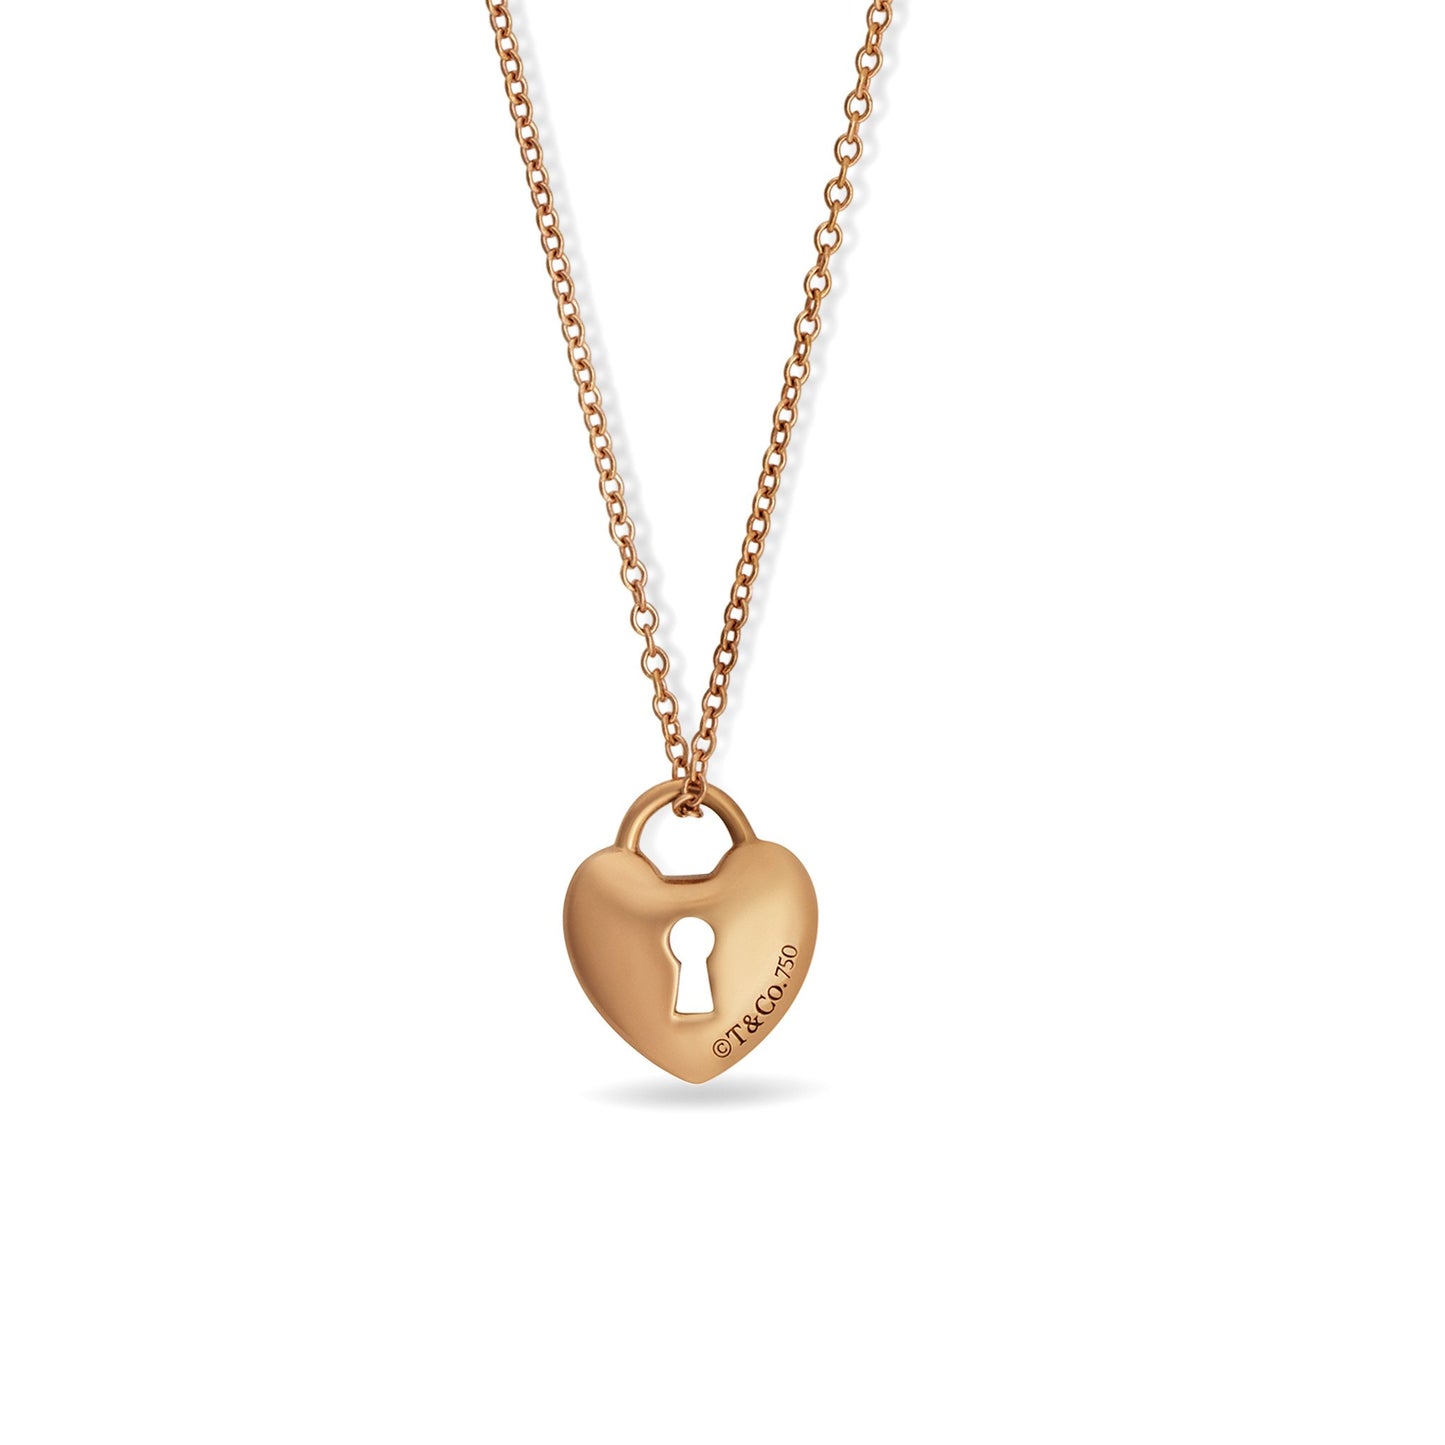 Pre-Owned Tiffany & Co. 18K Rose Gold Lock Heart Pendant Necklace